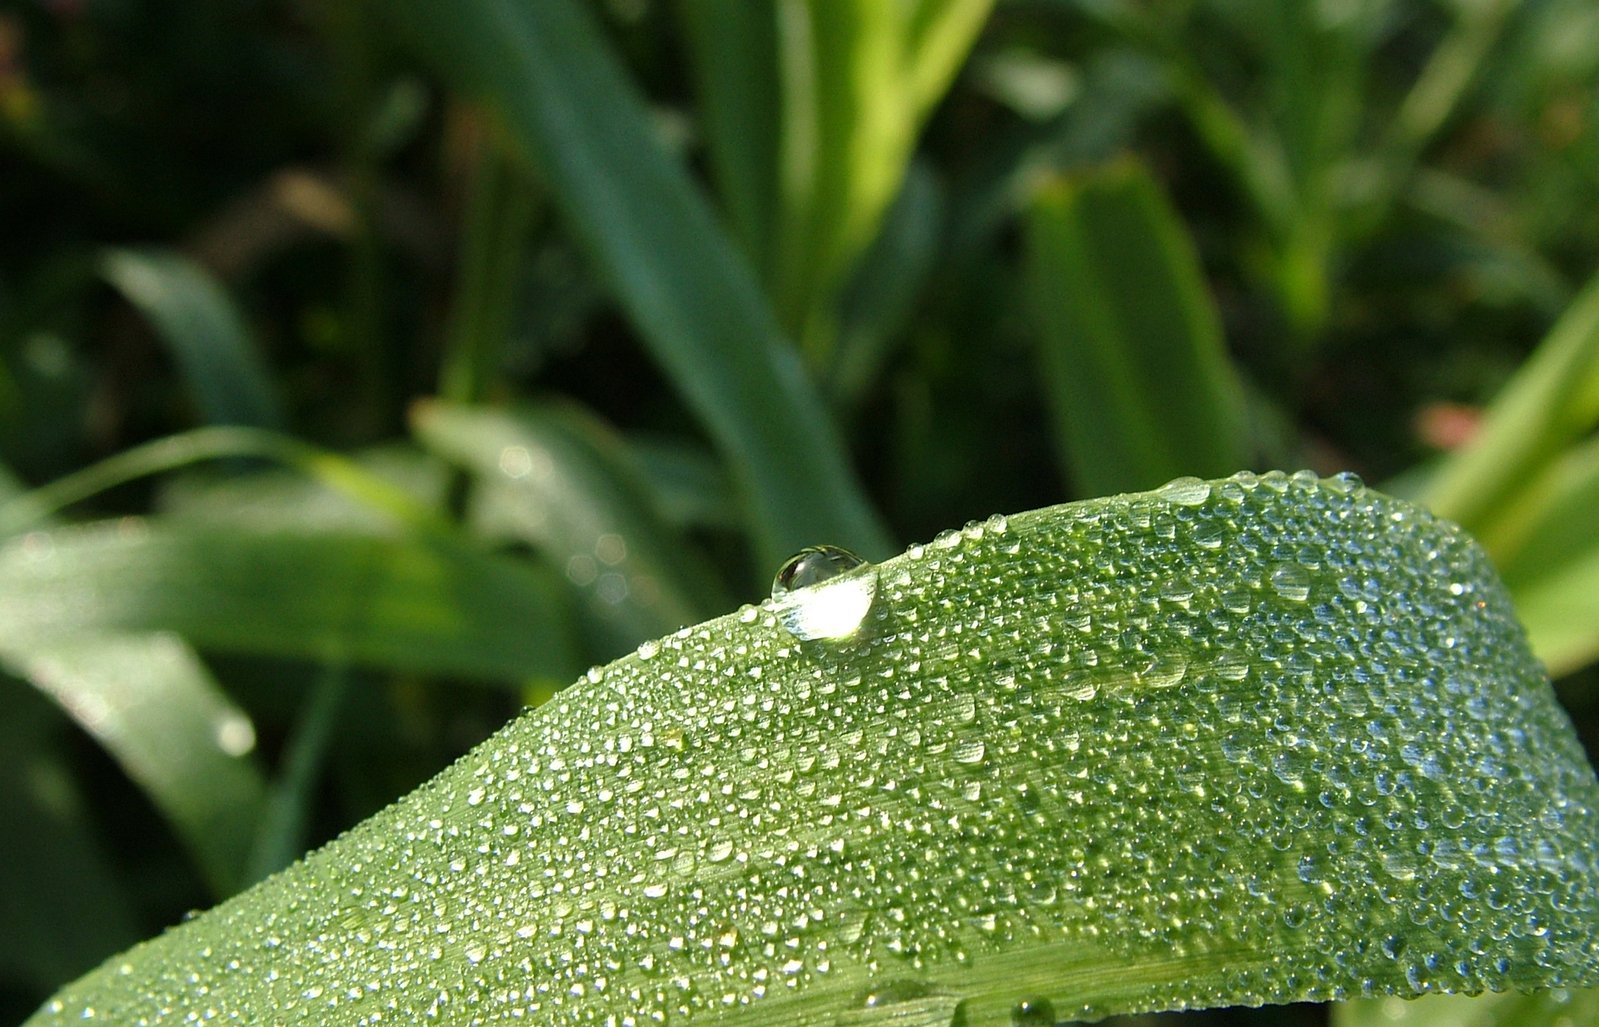 dewdrops on a leaf of grass in the sun